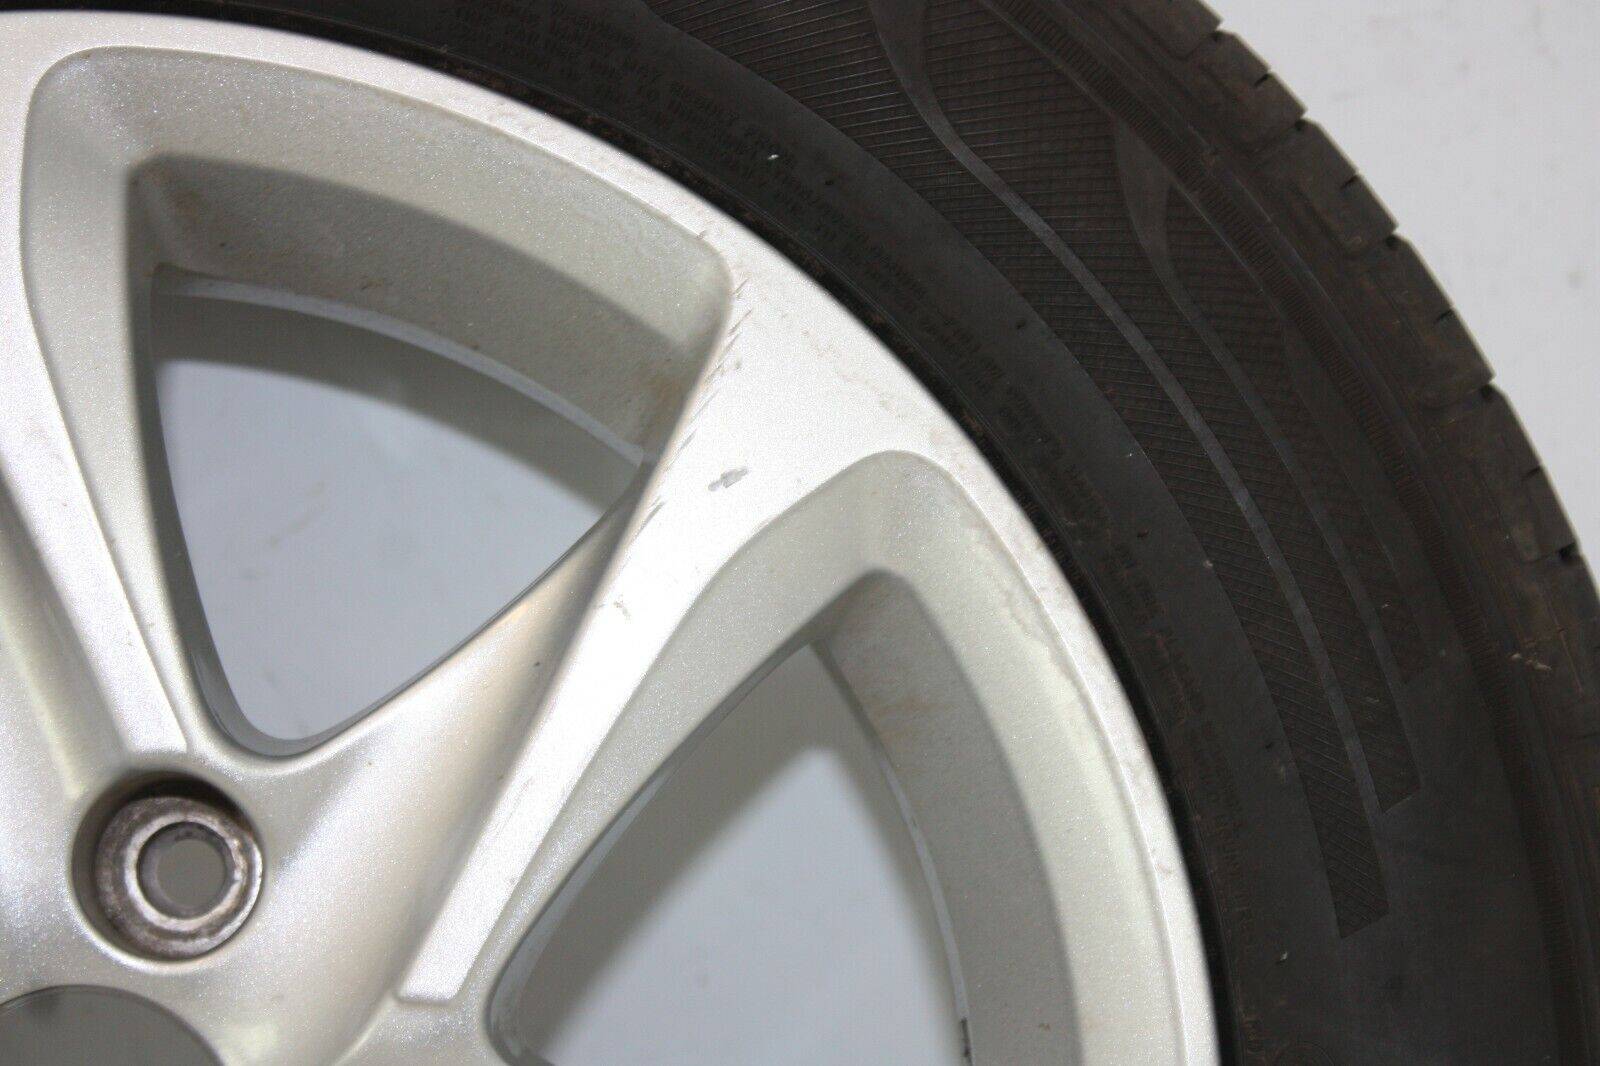 Peugeot-208-15-Inch-Alloy-Wheel-with-Tyre-9673773577-Genuine-175458680937-6